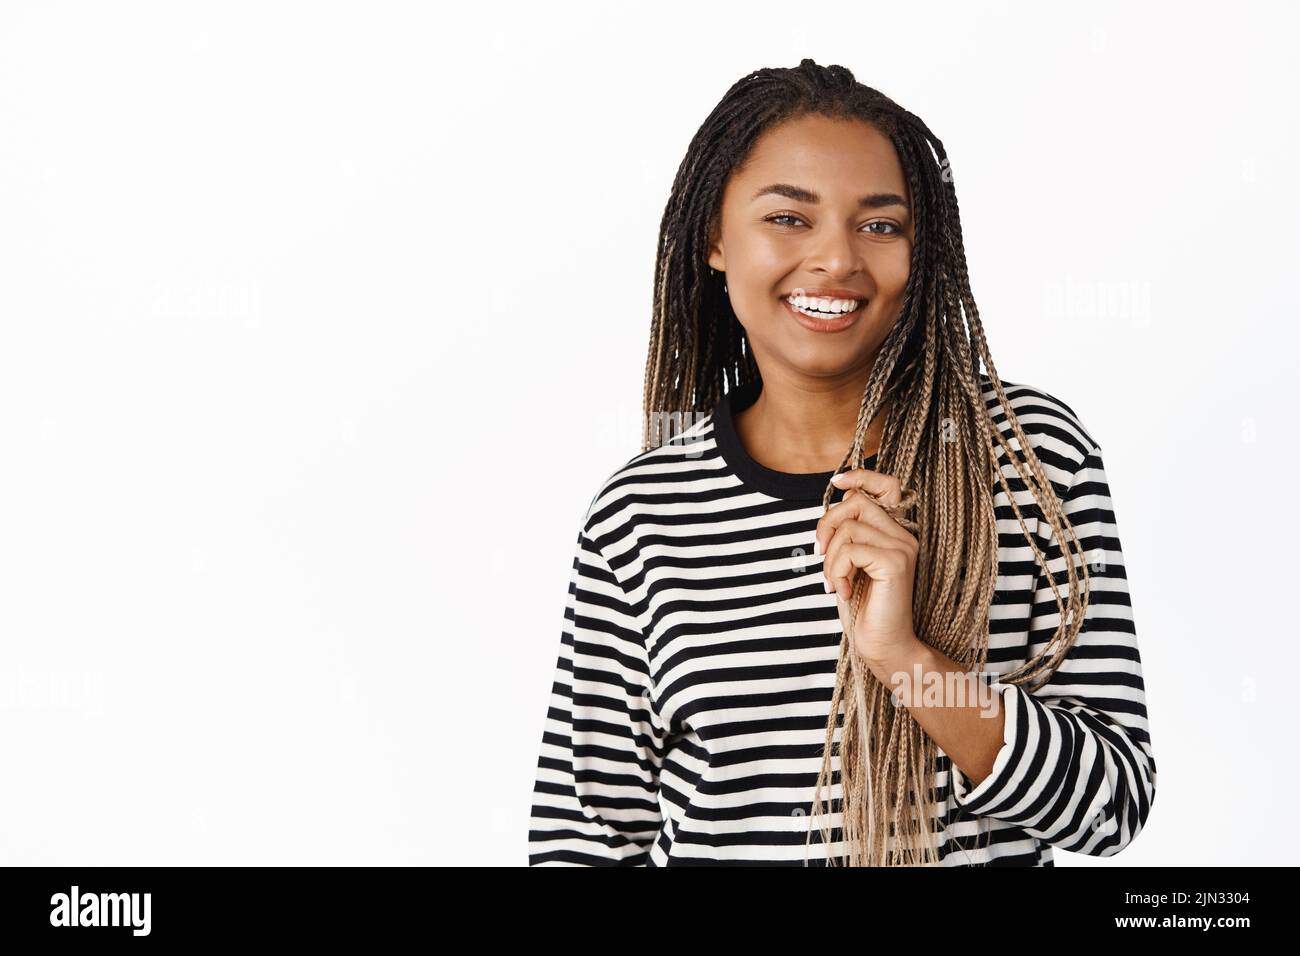 Beautiful female model with dreads, smiling and laughing, playing with braids, standing over white background Stock Photo